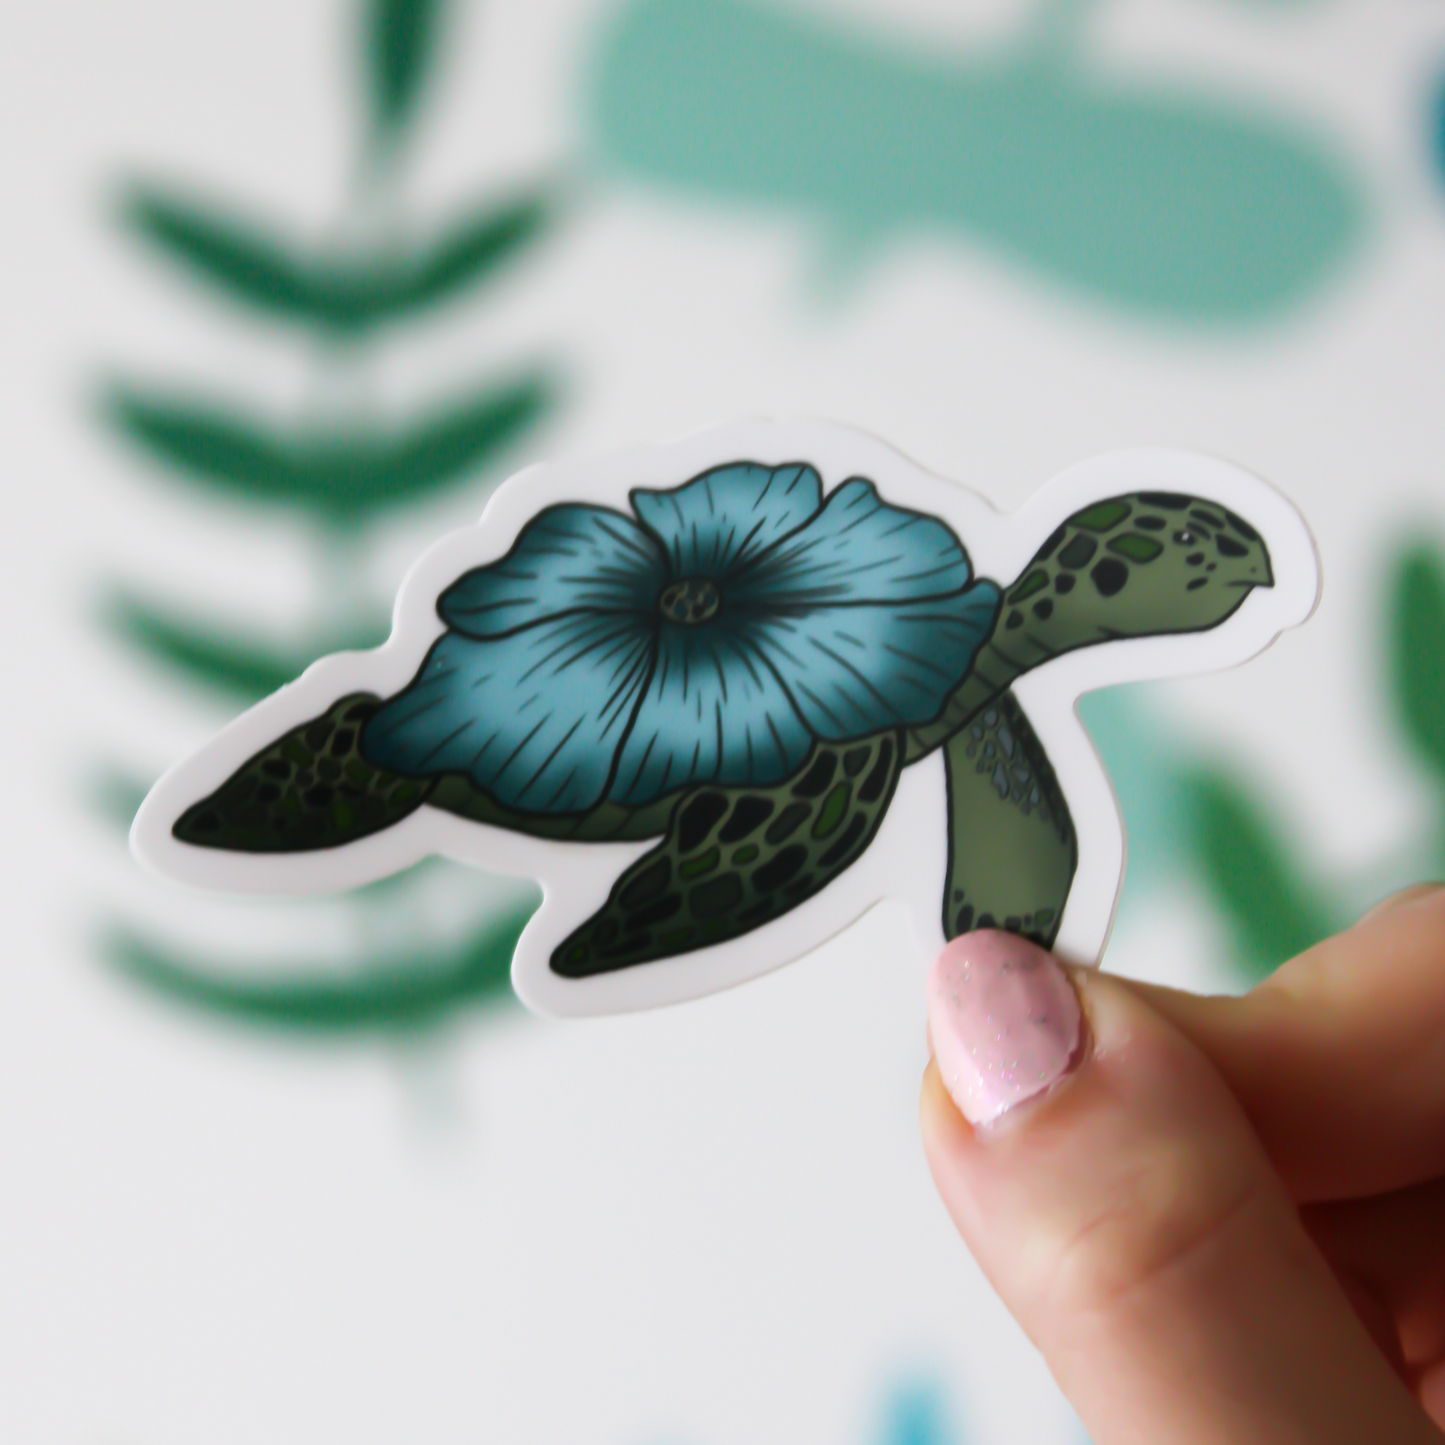 A blurred leafy pattern in the background. In the front is a hand holding a turtle sticker with a blue flower on it in place of a shell.